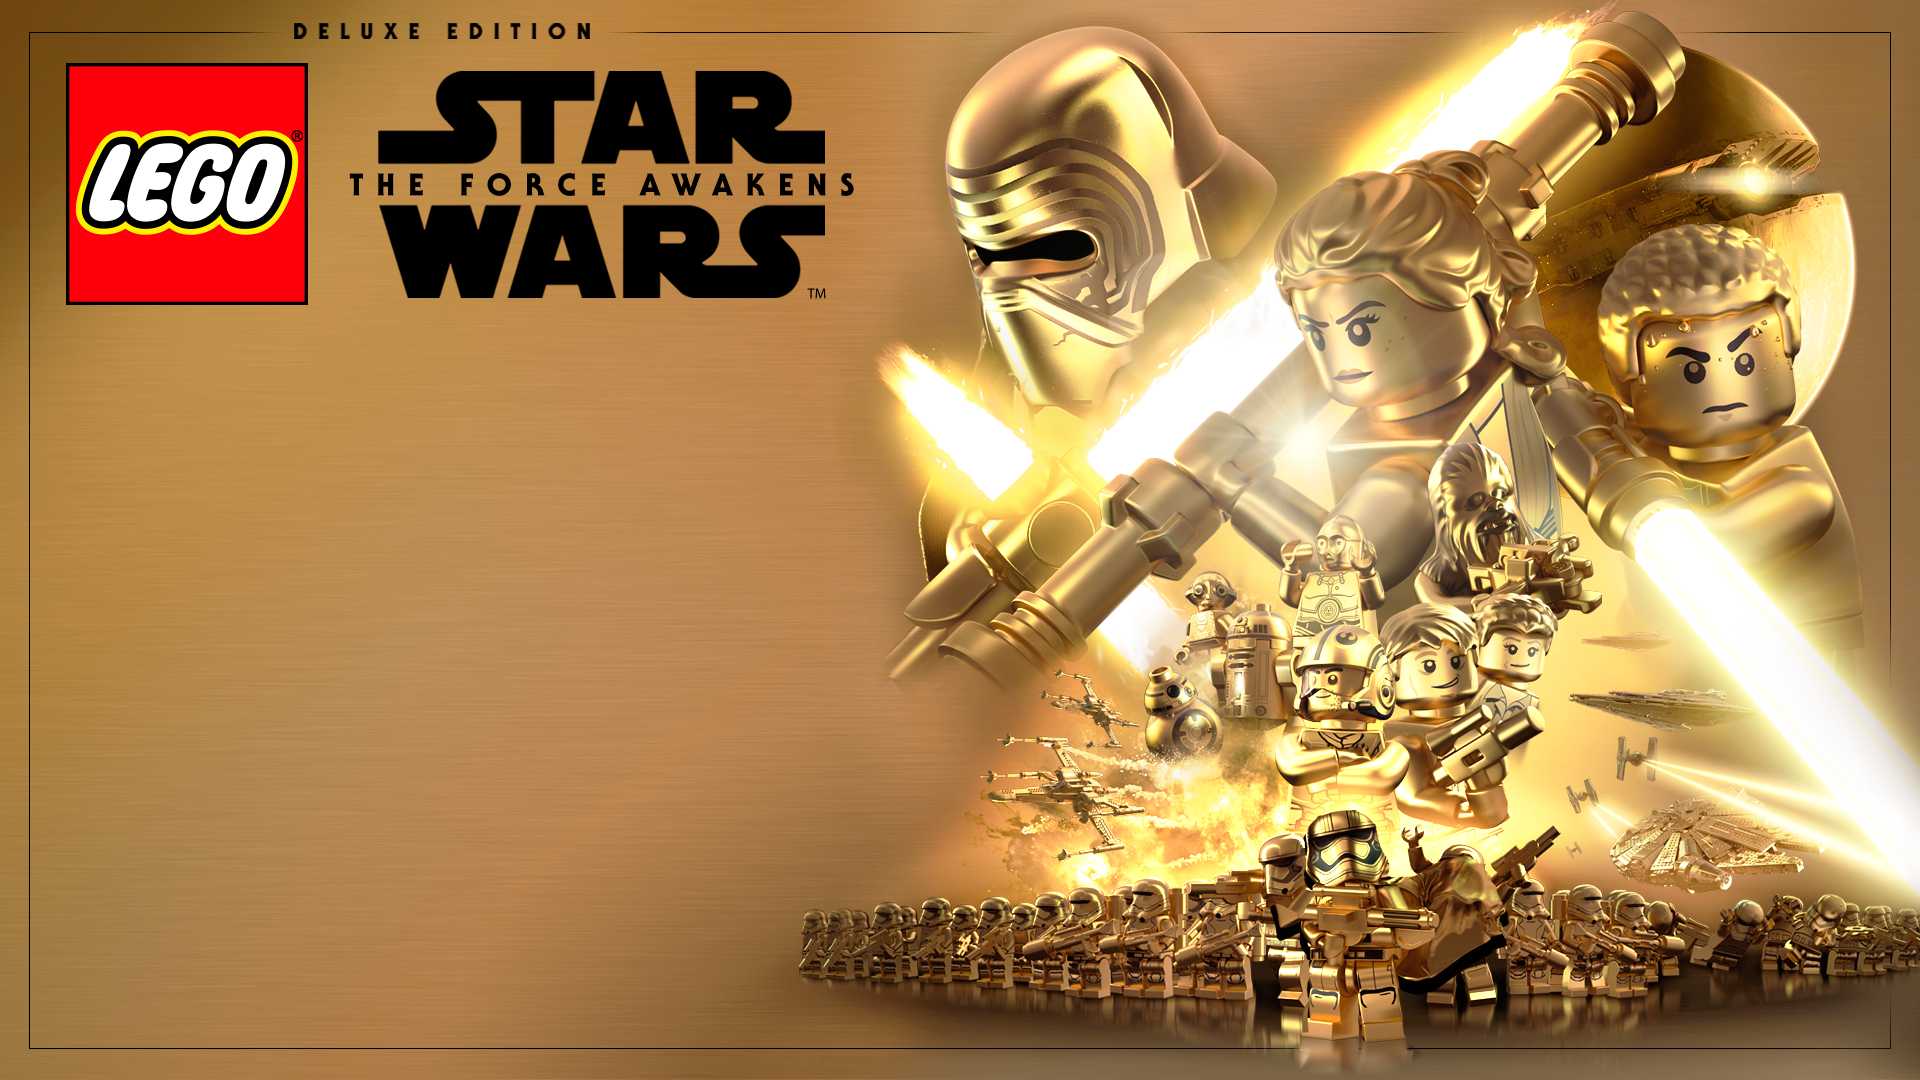 LEGO® Star Wars™: The Force Awakens Deluxe Edition